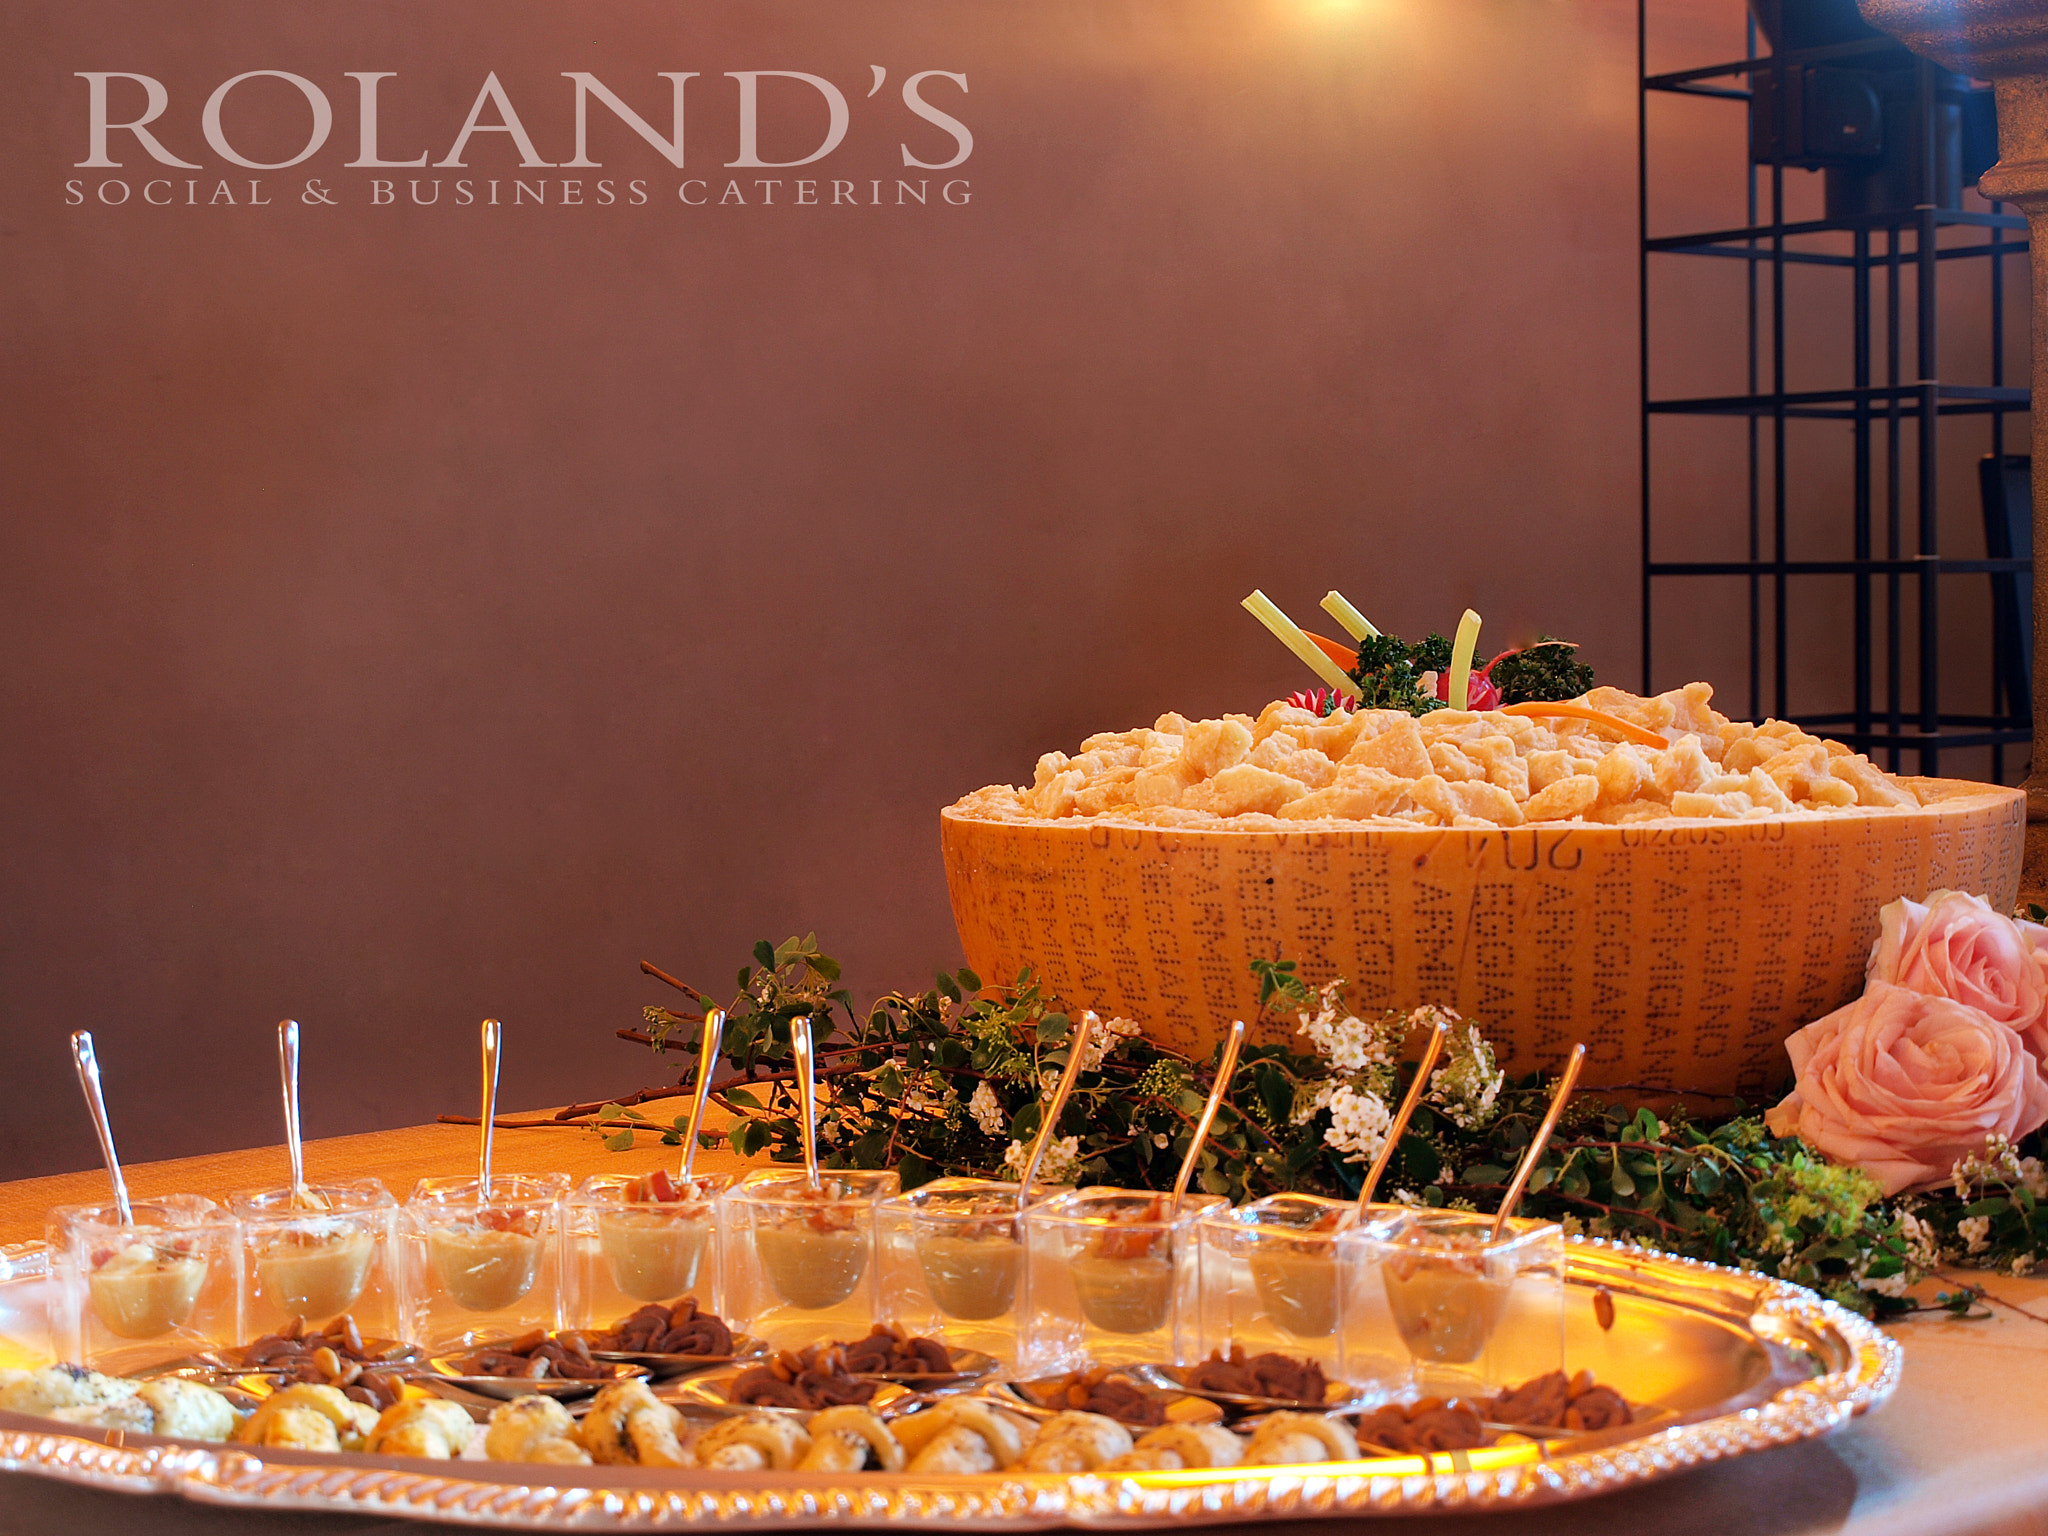 Olympus E-450 (EVOLT E-450) + OLYMPUS 14-42mm Lens sample photo. Roland's social & business catering  photography